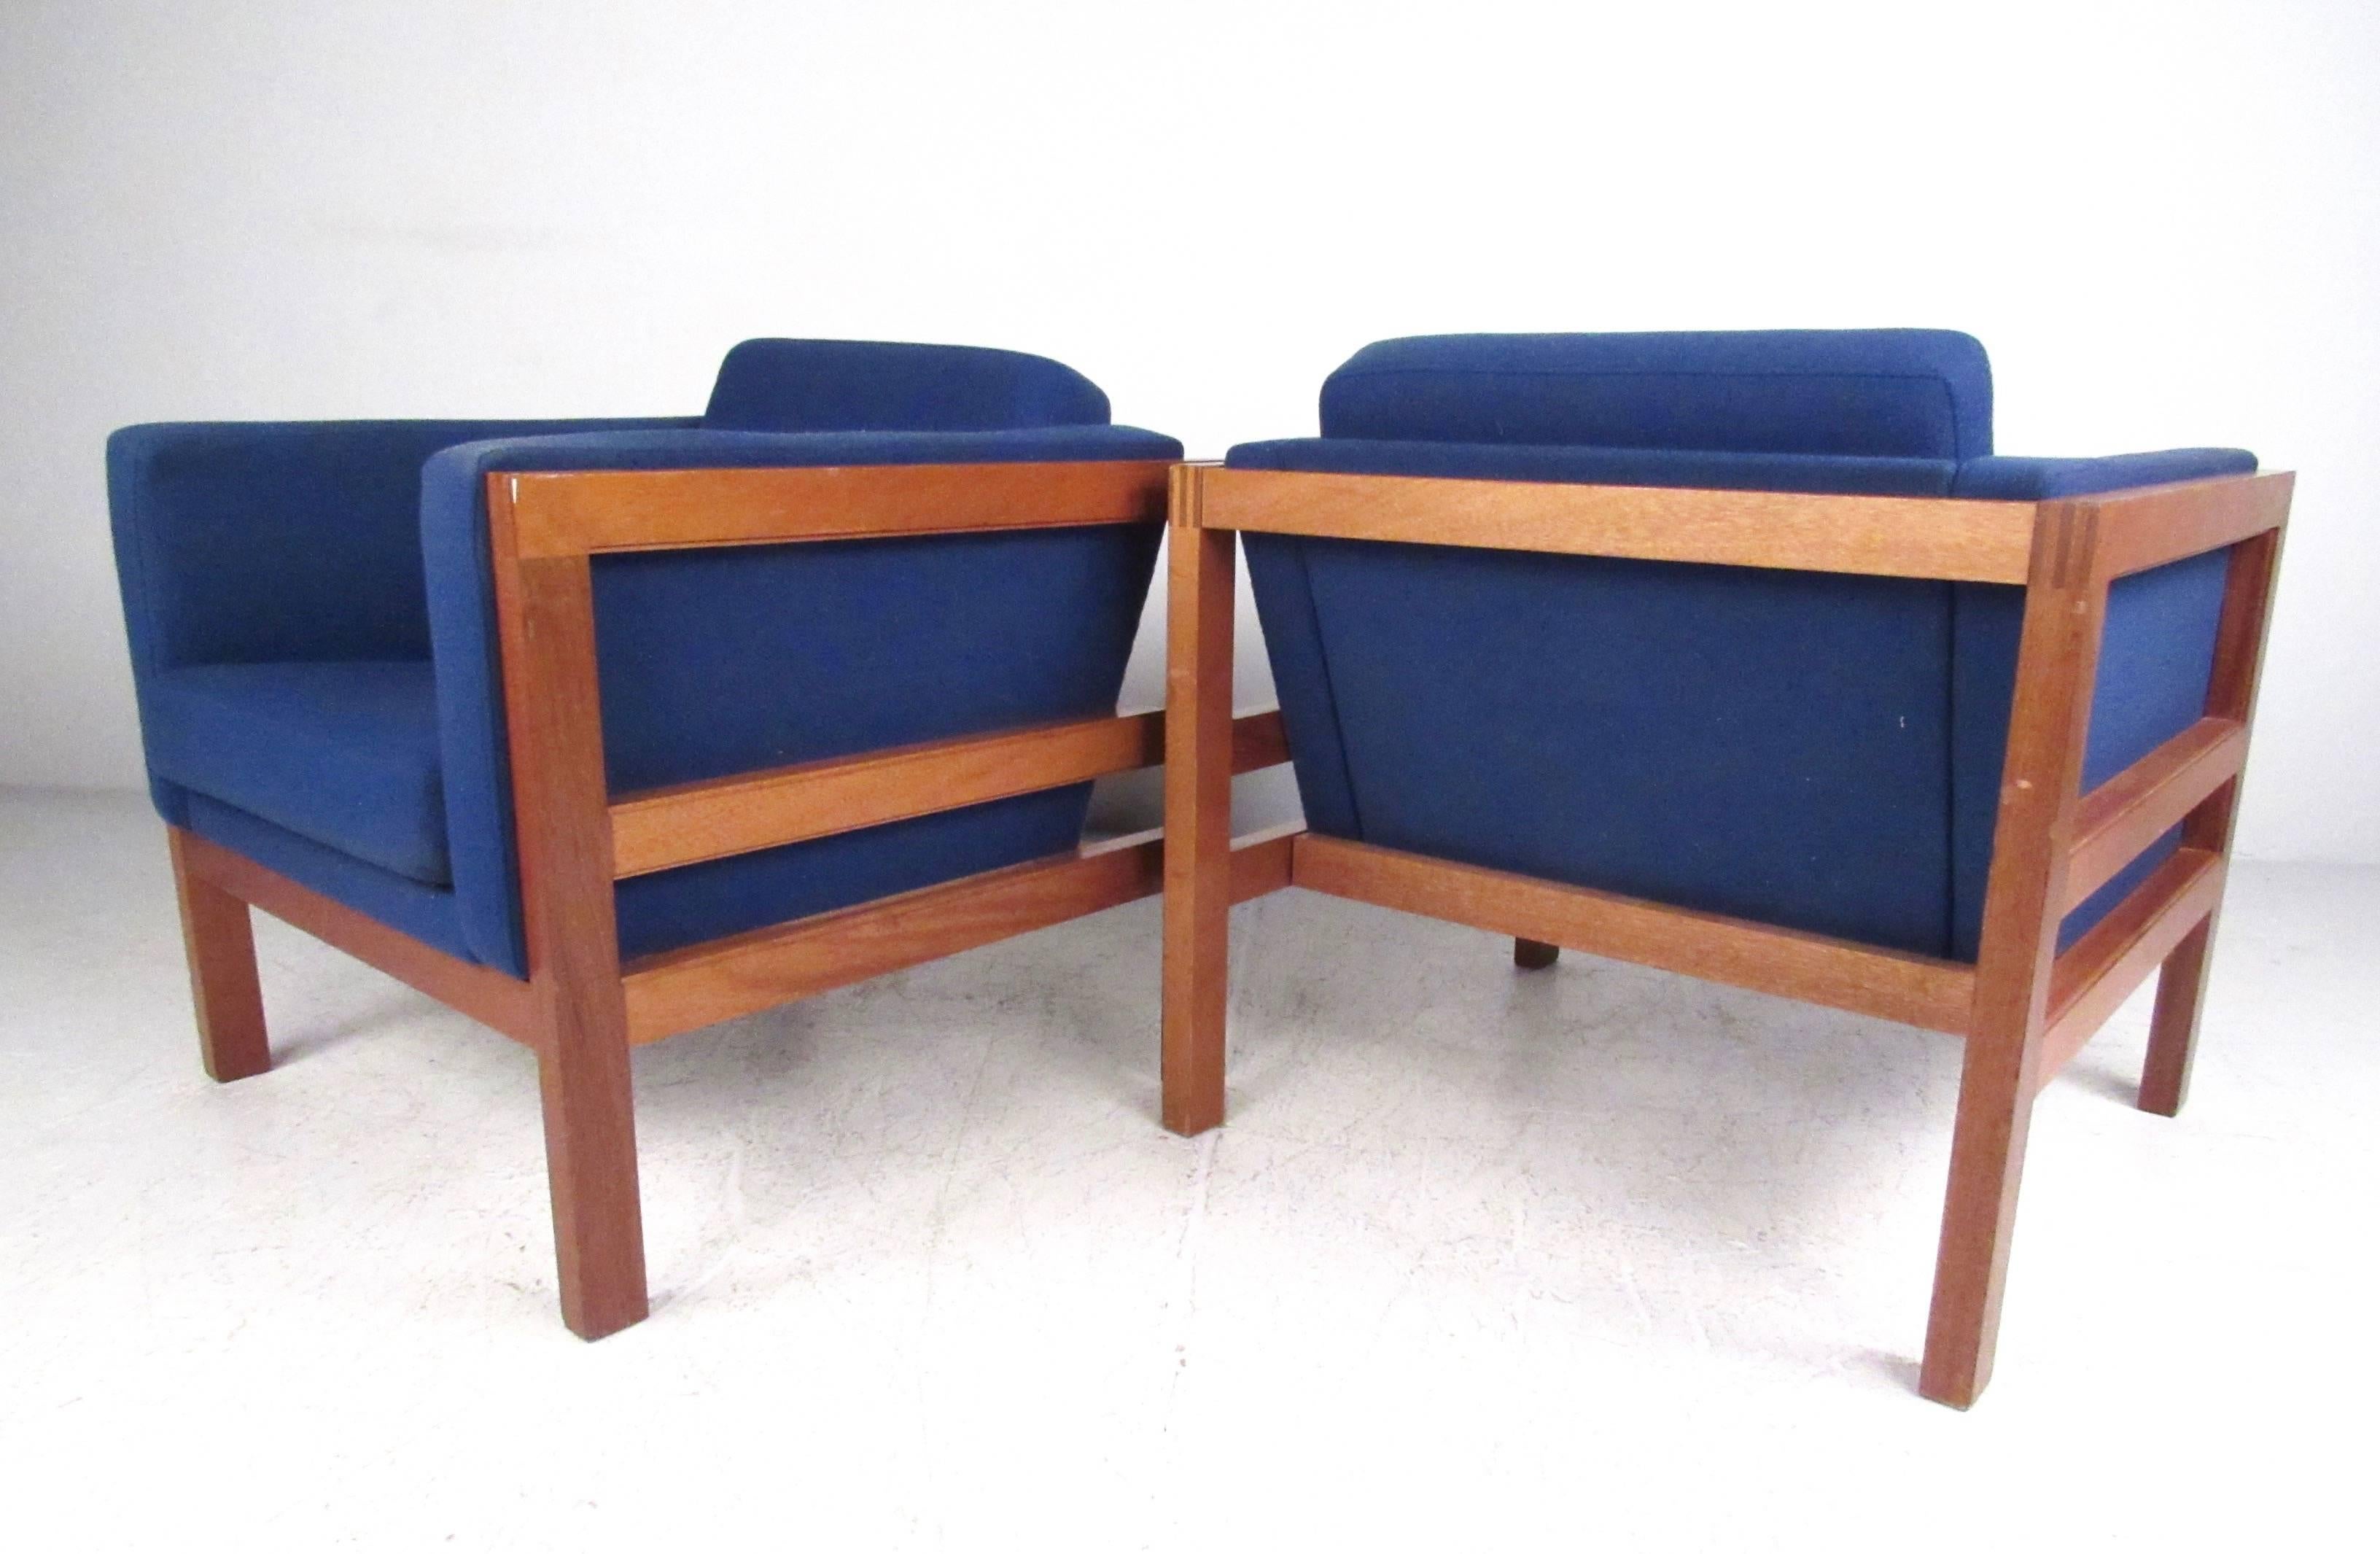 This stylish pair of Danish teak lounge chairs makes a beautiful Mid-Century addition to any interior. Quality dovetail construction, comfortable strap seats, and vibrant vintage blue fabric set this pair apart from other vintage club chairs.